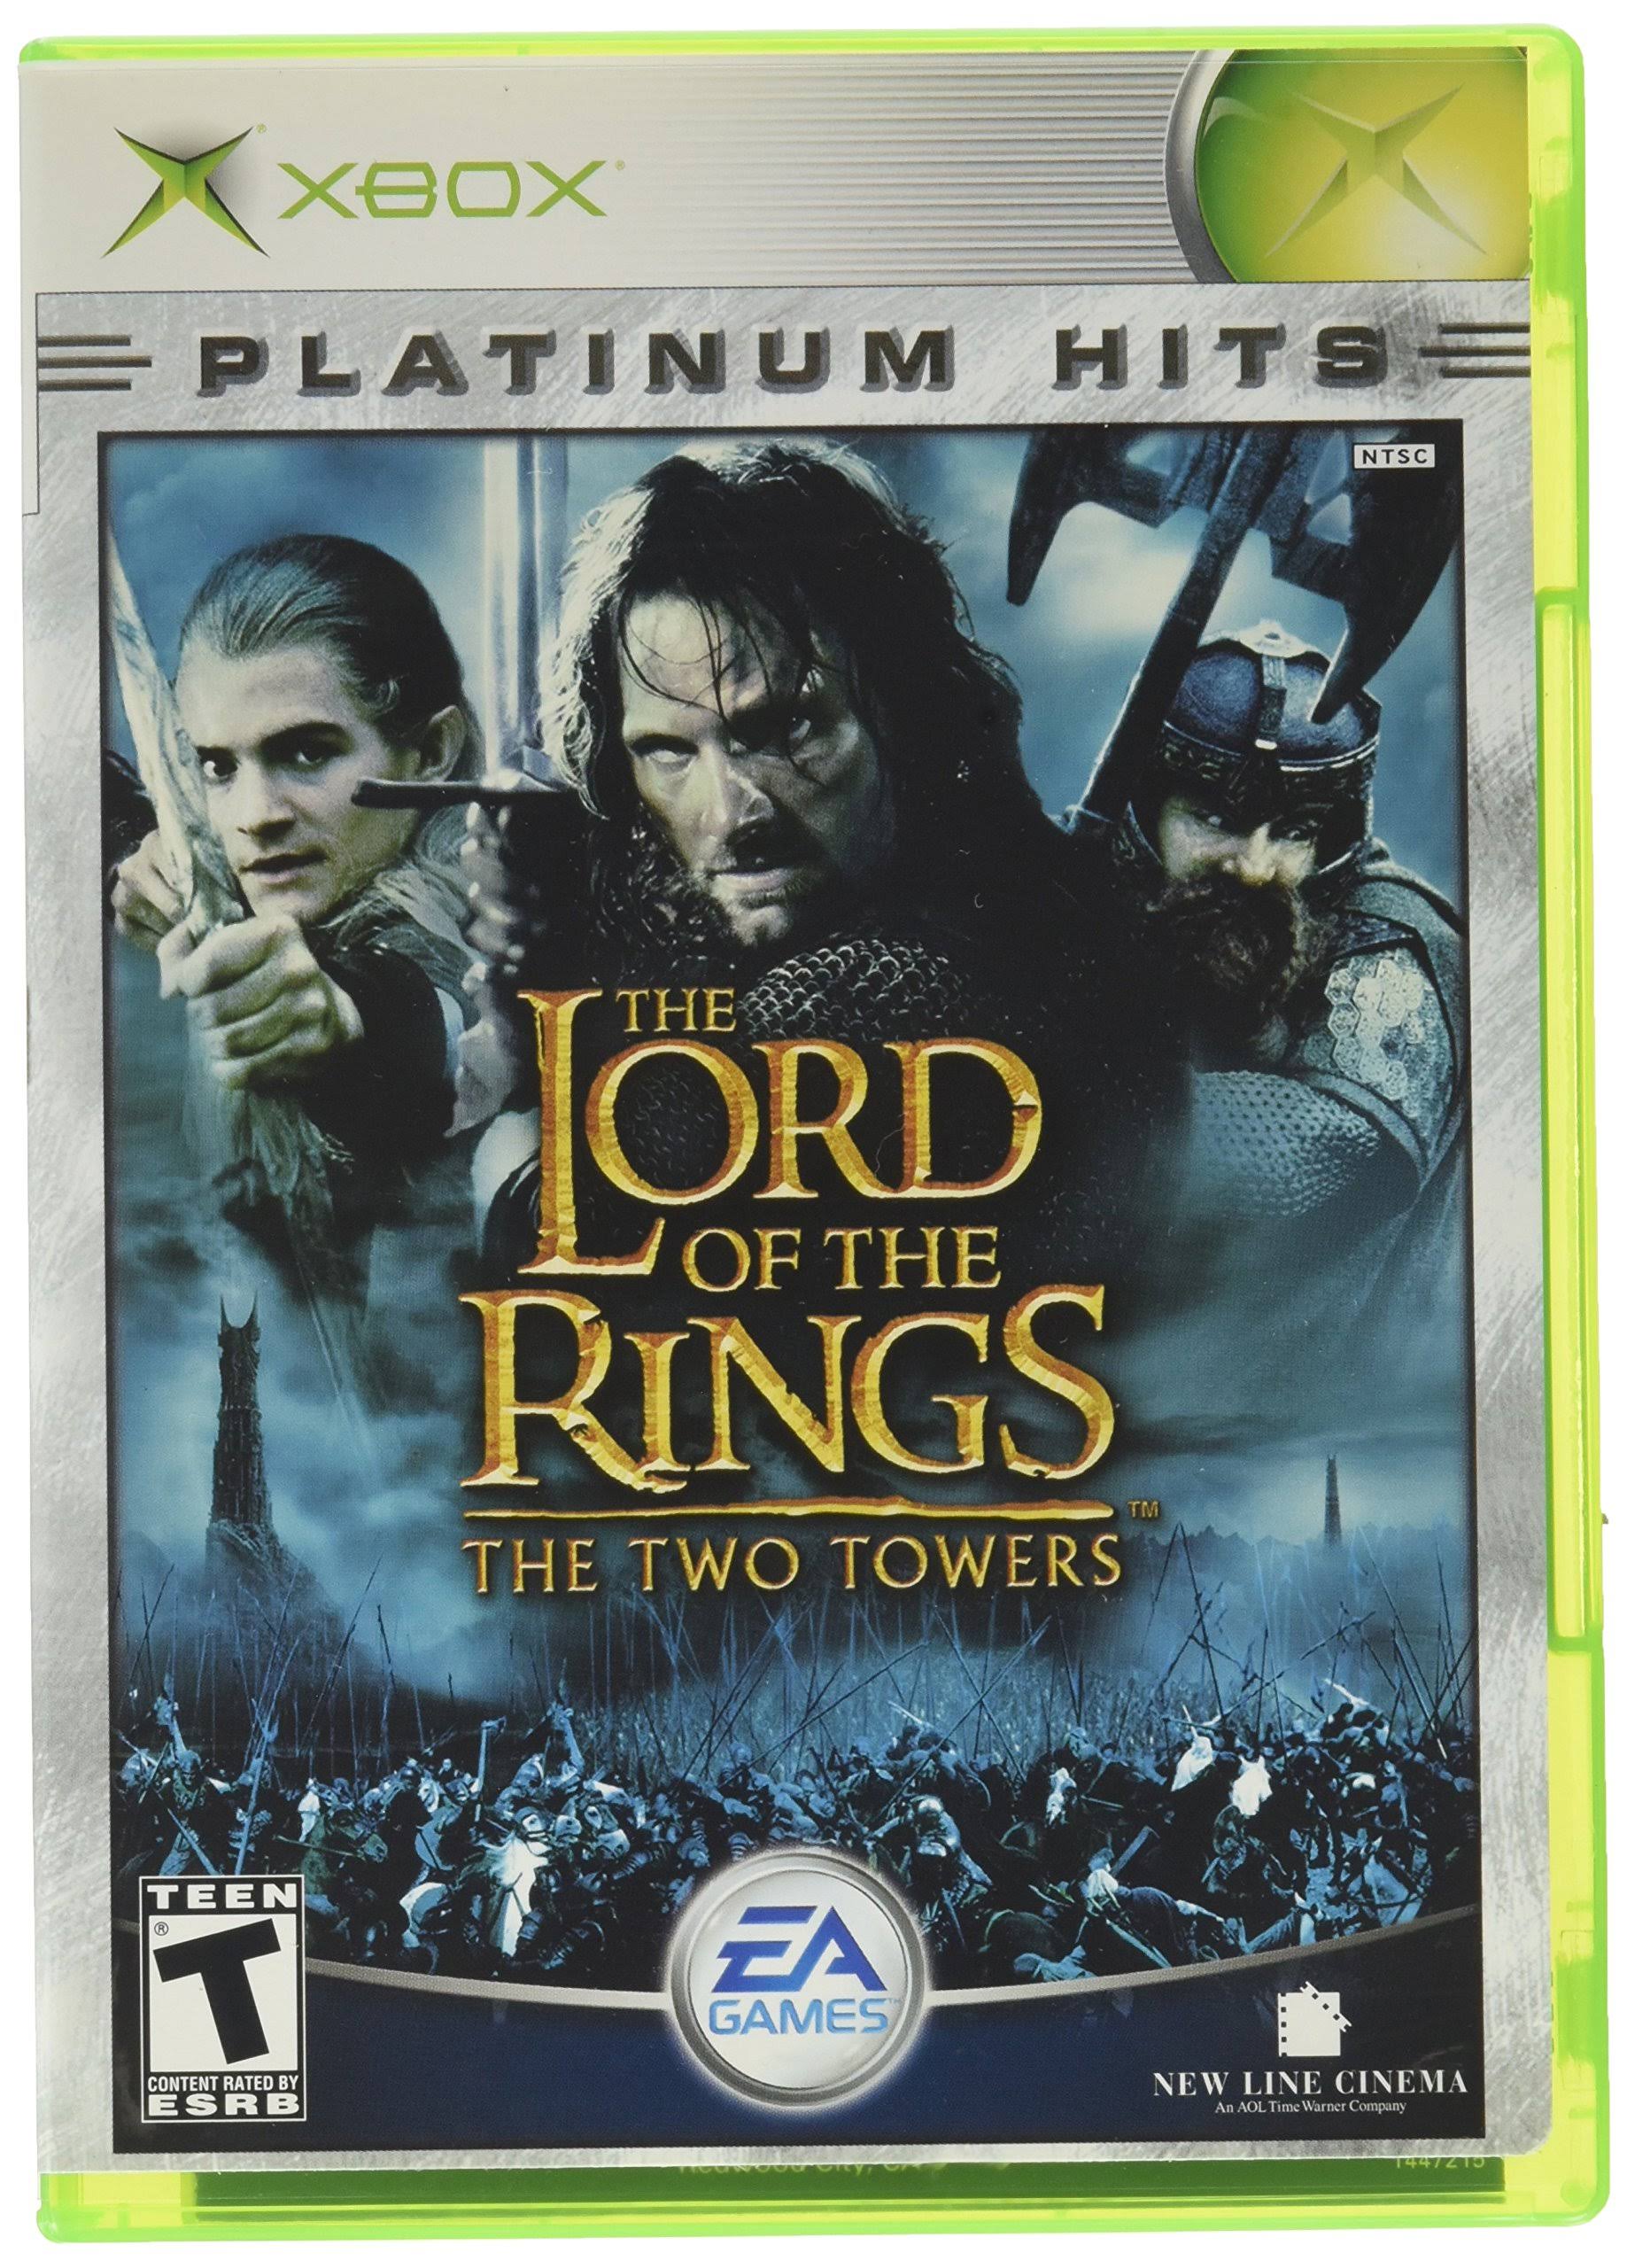 The Lord of the Rings: The Two Towers - Xbox